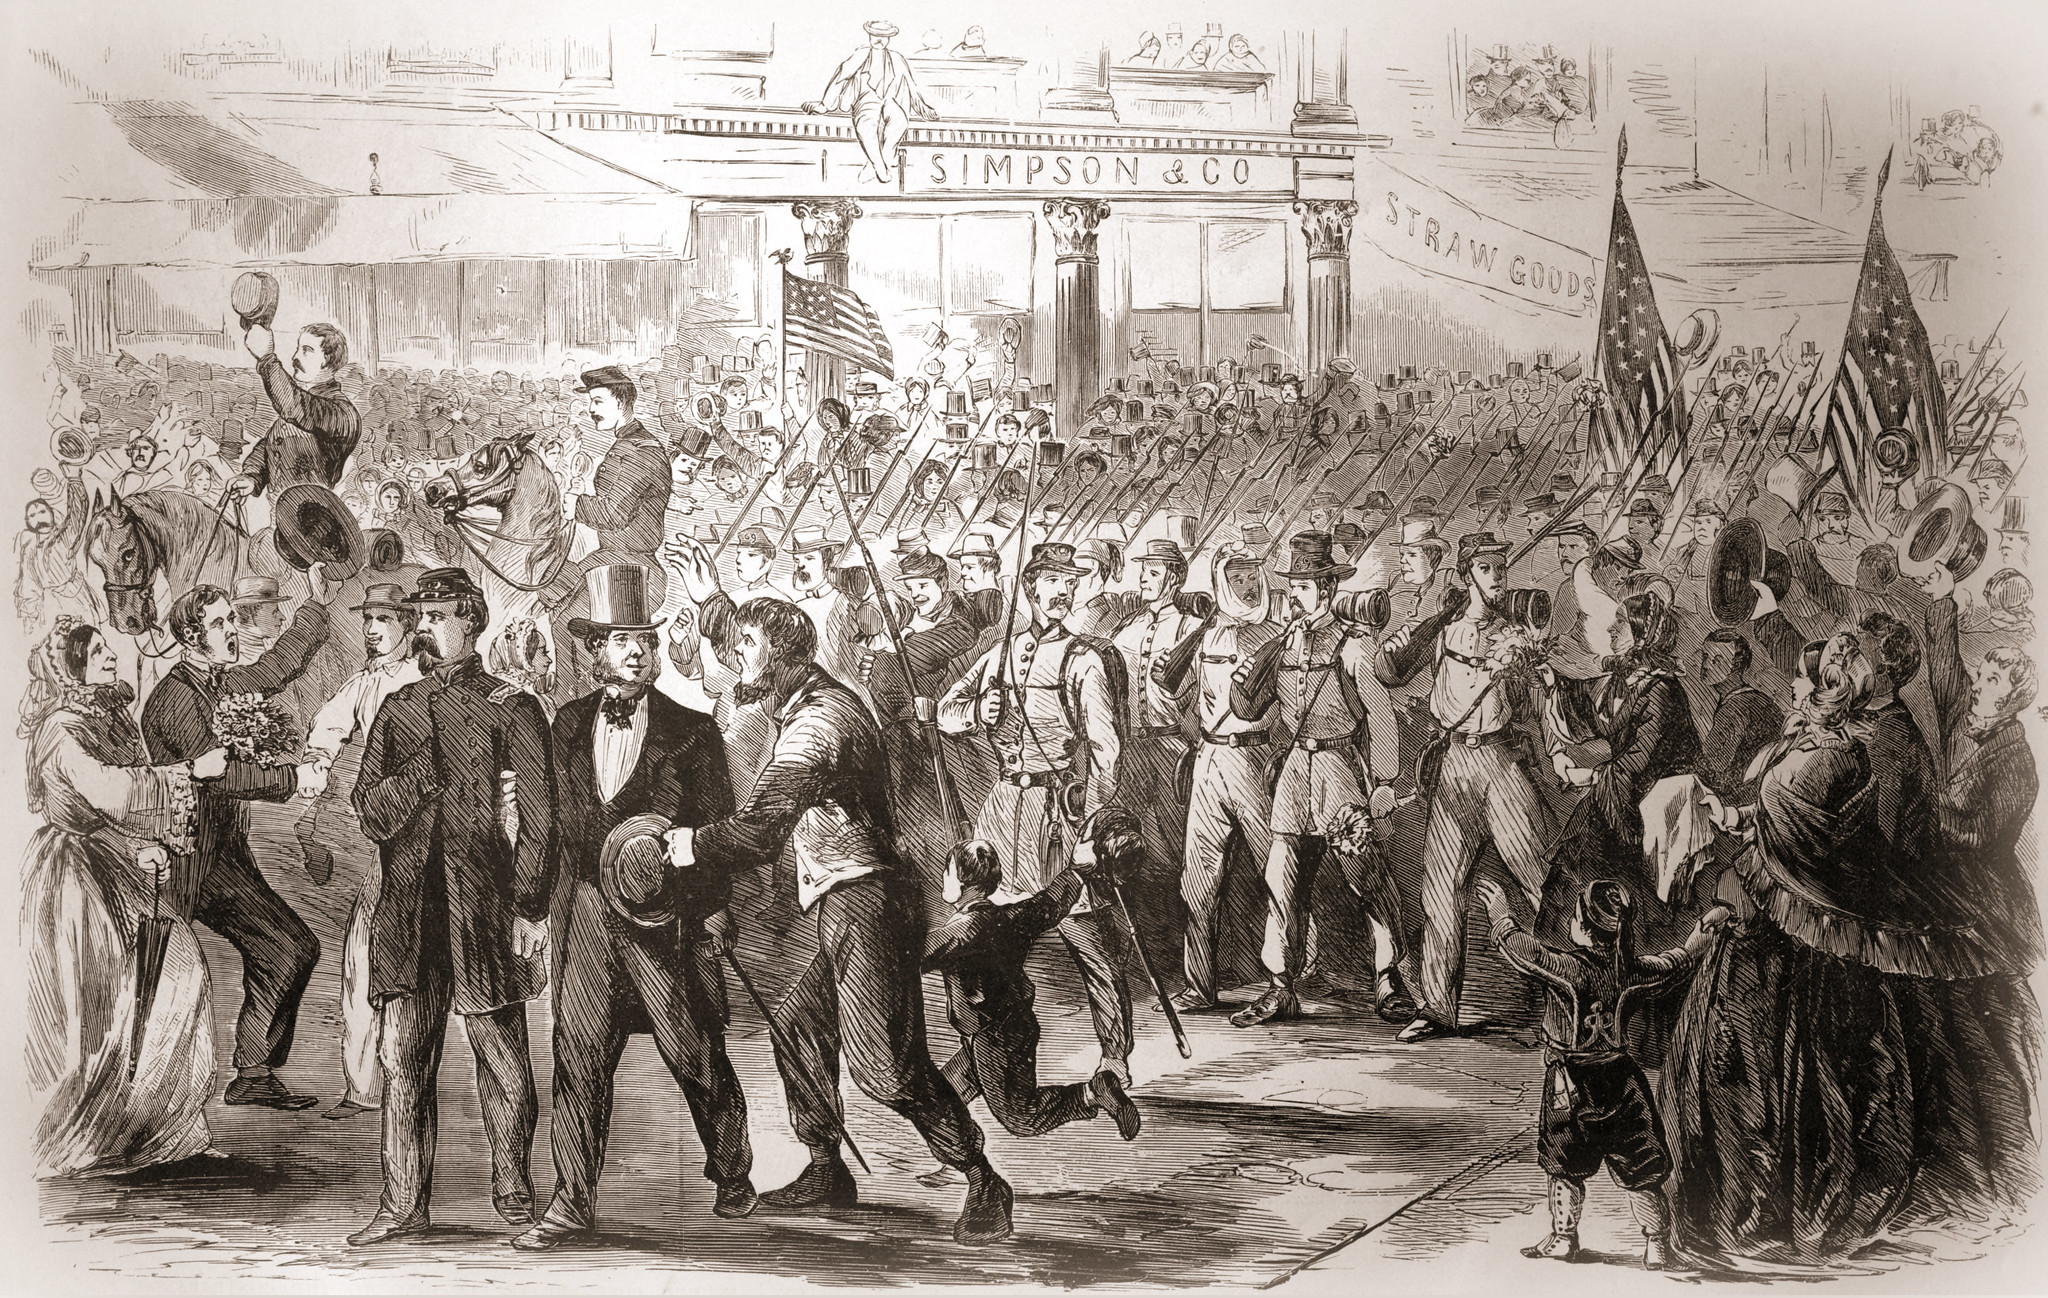 Reception by the People of New York of the Sixty-Ninth Regiment, N. Y. S. M., on Their Return from the Seat of War, Escorted by the New York Seventh Regiment.